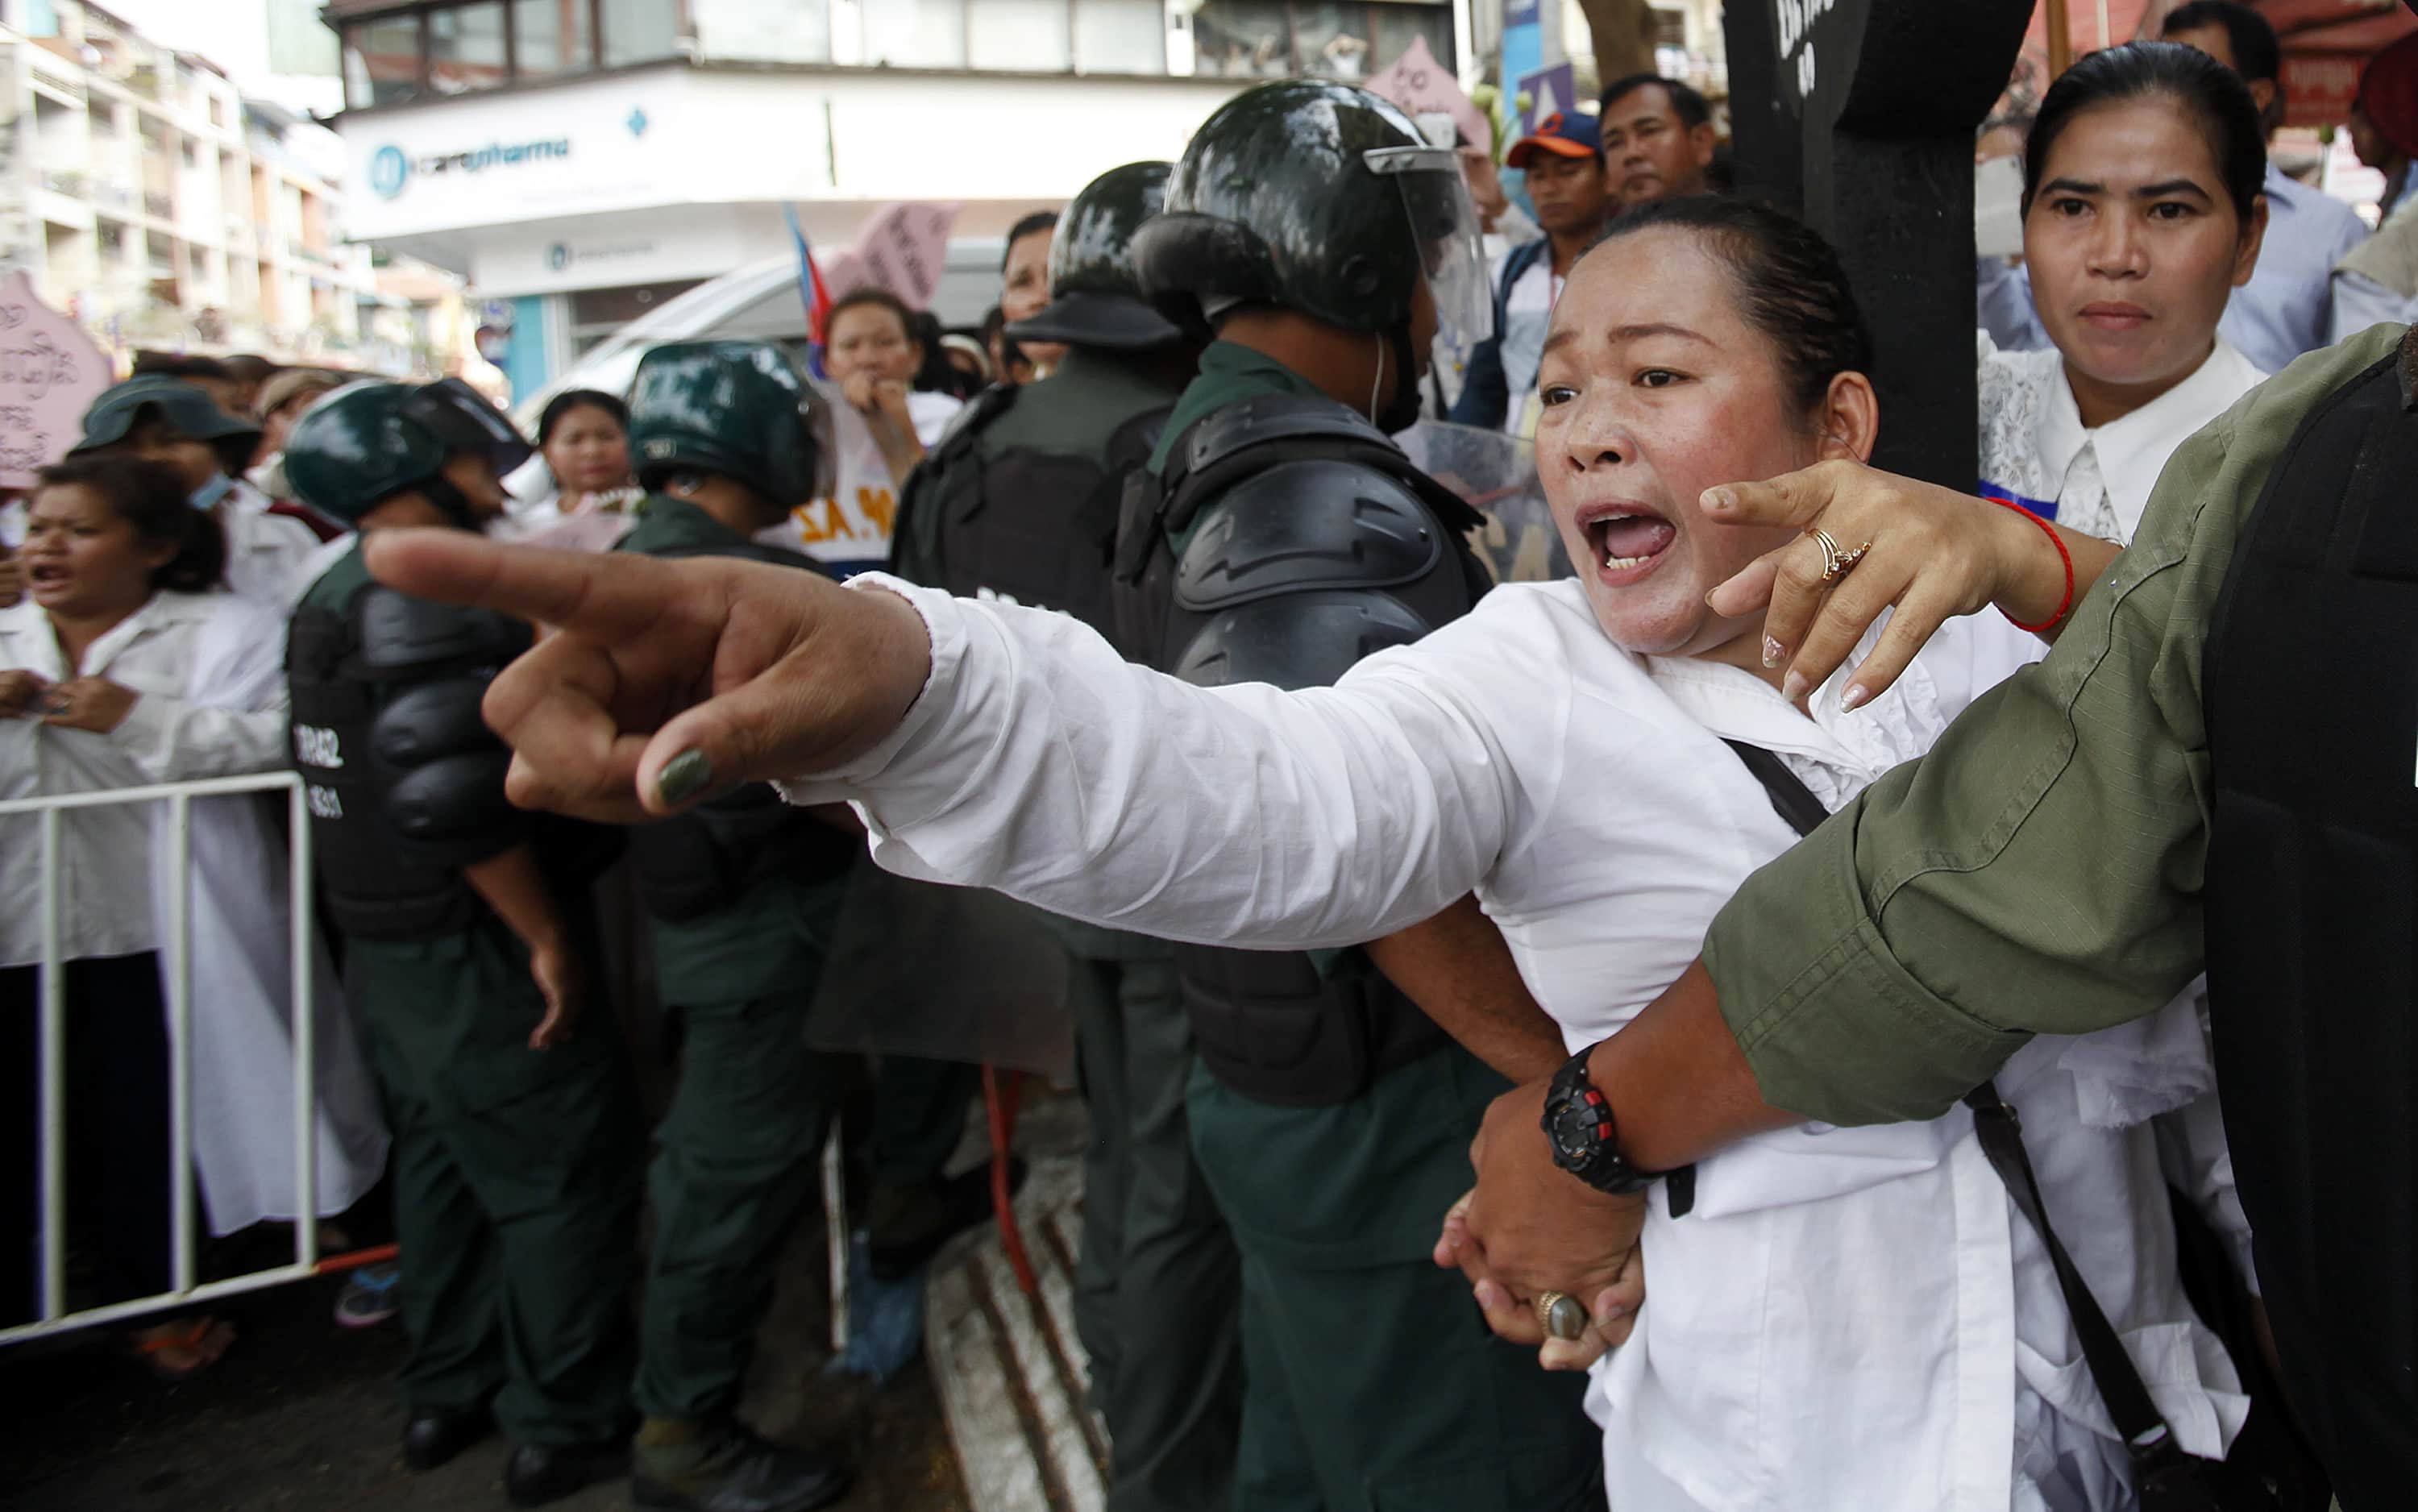 Protesters attempt to march to the Supreme Court during a demonstration in central Phnom Penh on 3 March 2014. Protesters demanded the release of 21 detainees who have been jailed since 3 January, when military police opened fire on workers striking over low pay, killing four people., REUTERS/Samrang Pring